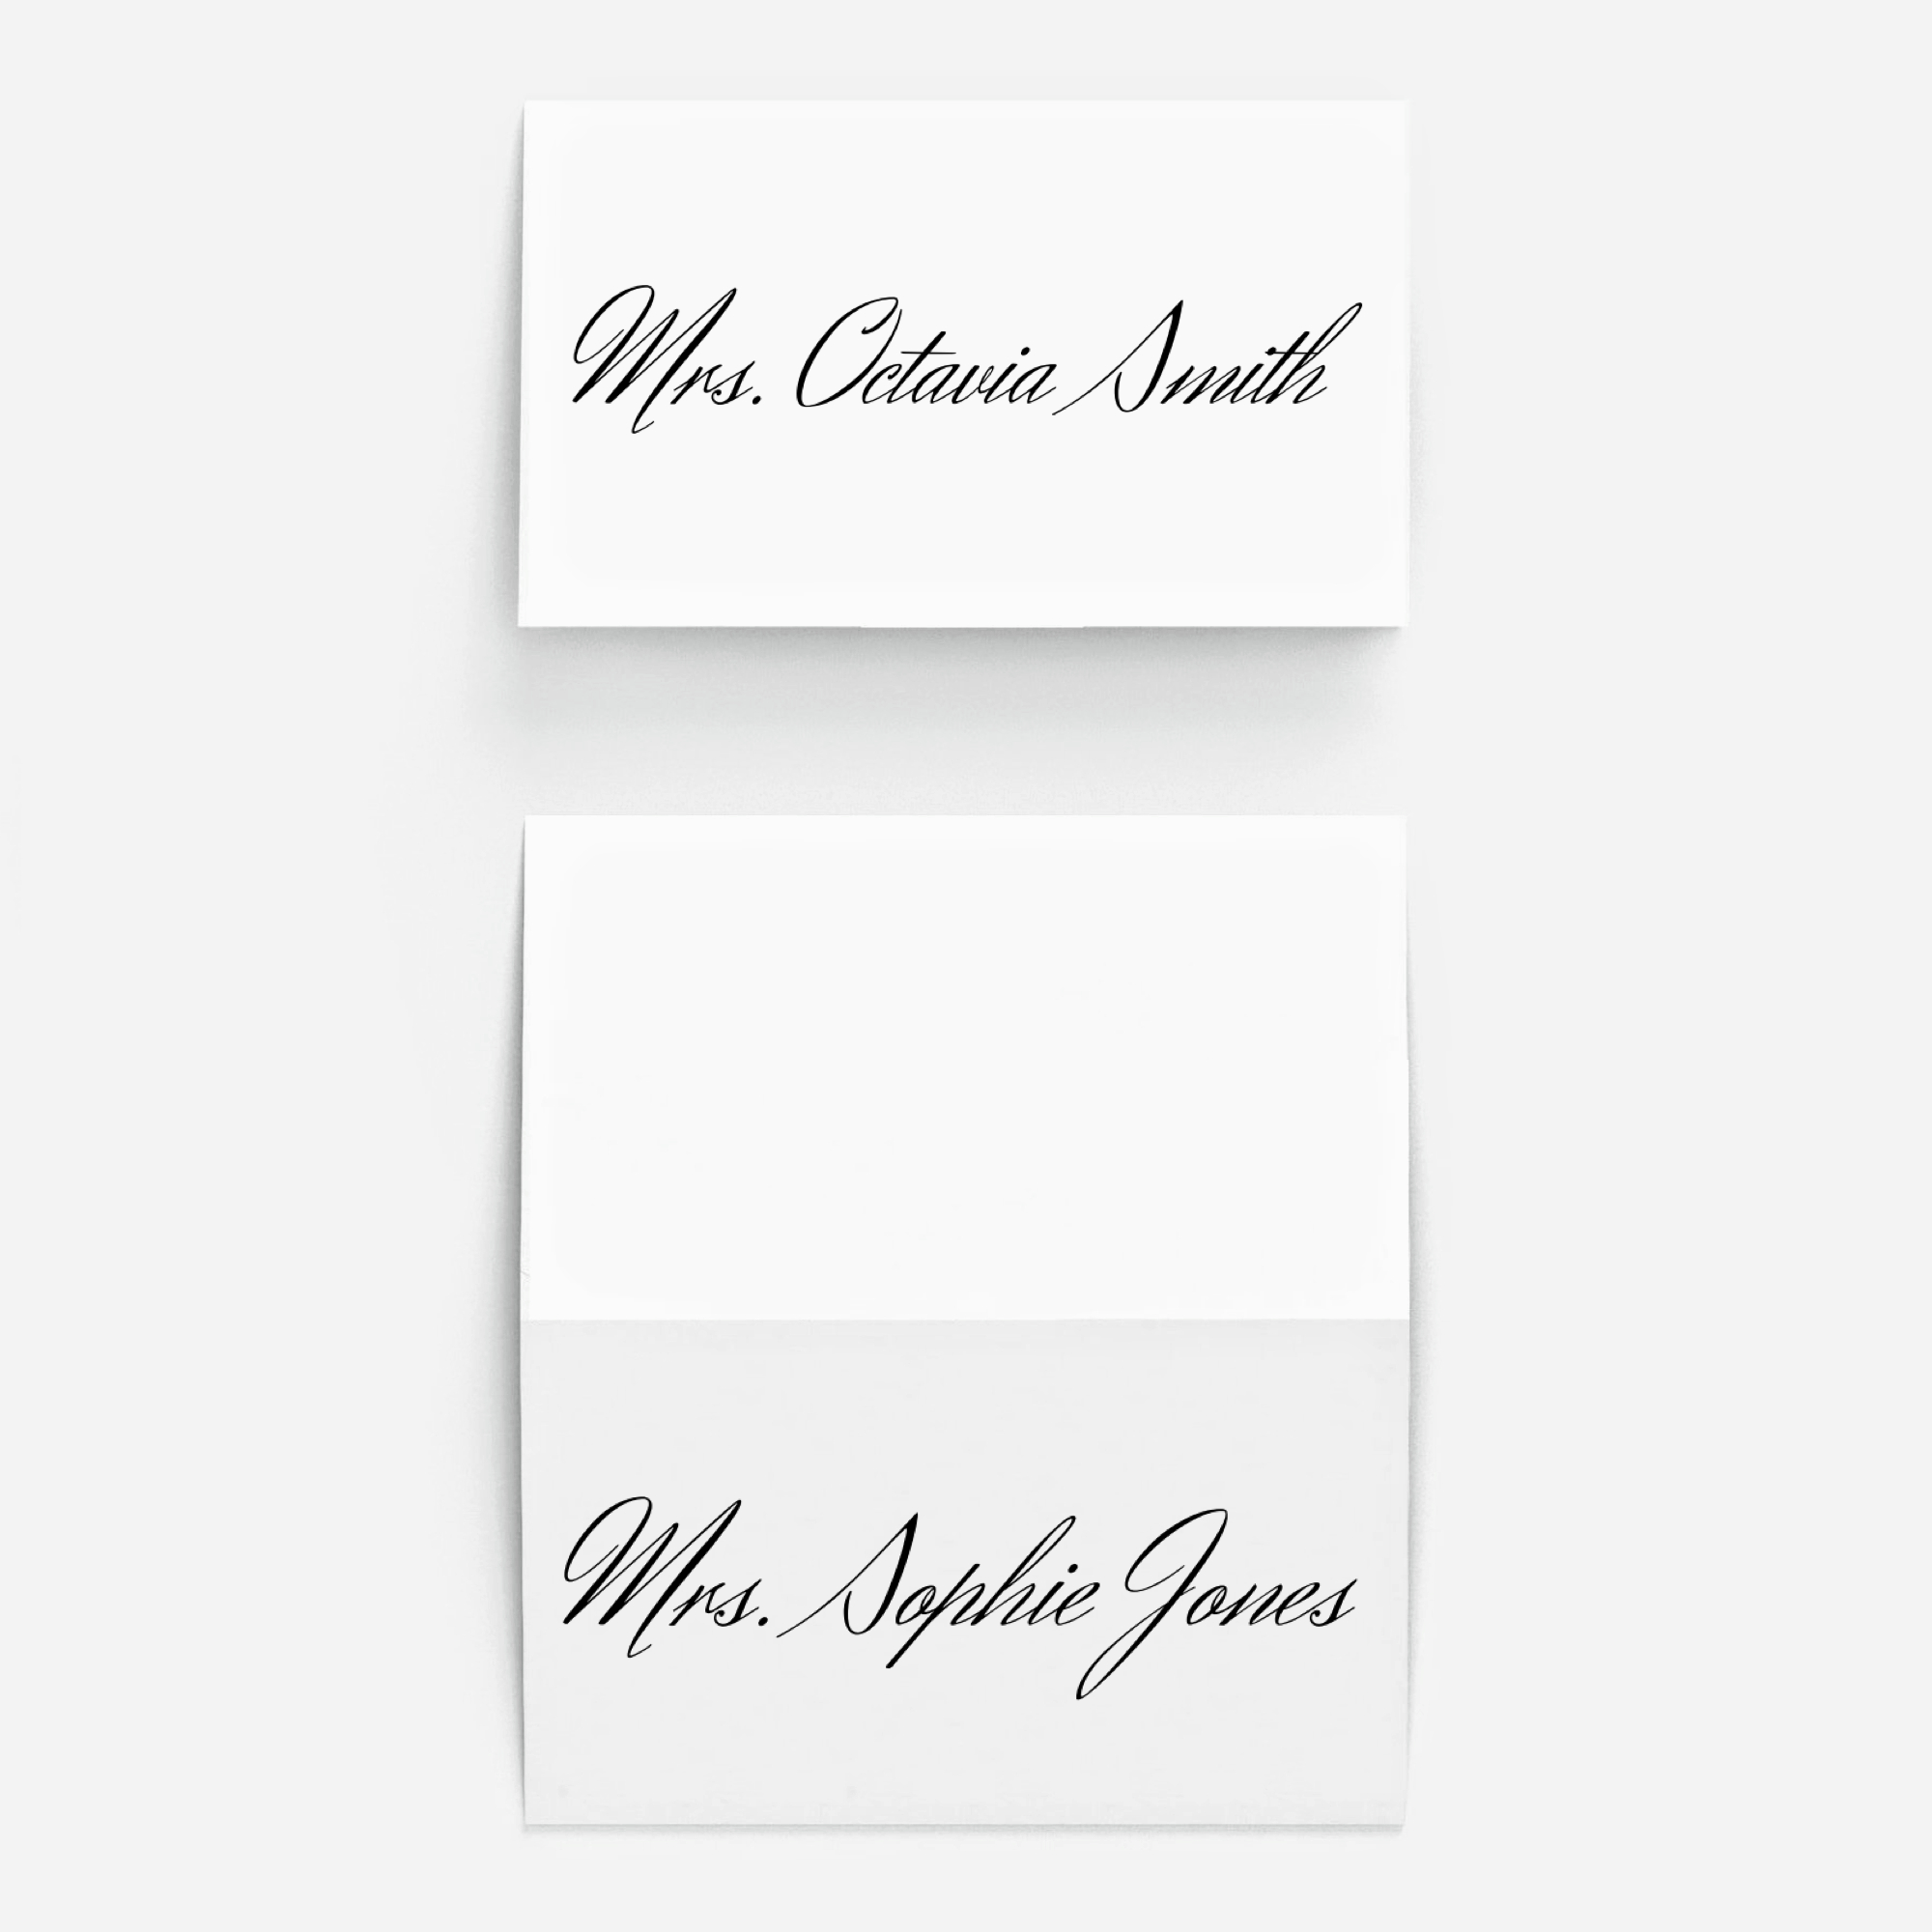 Pinplace Cards Online On 10 Stunning Fonts For Diy For Celebrate It Templates Place Cards